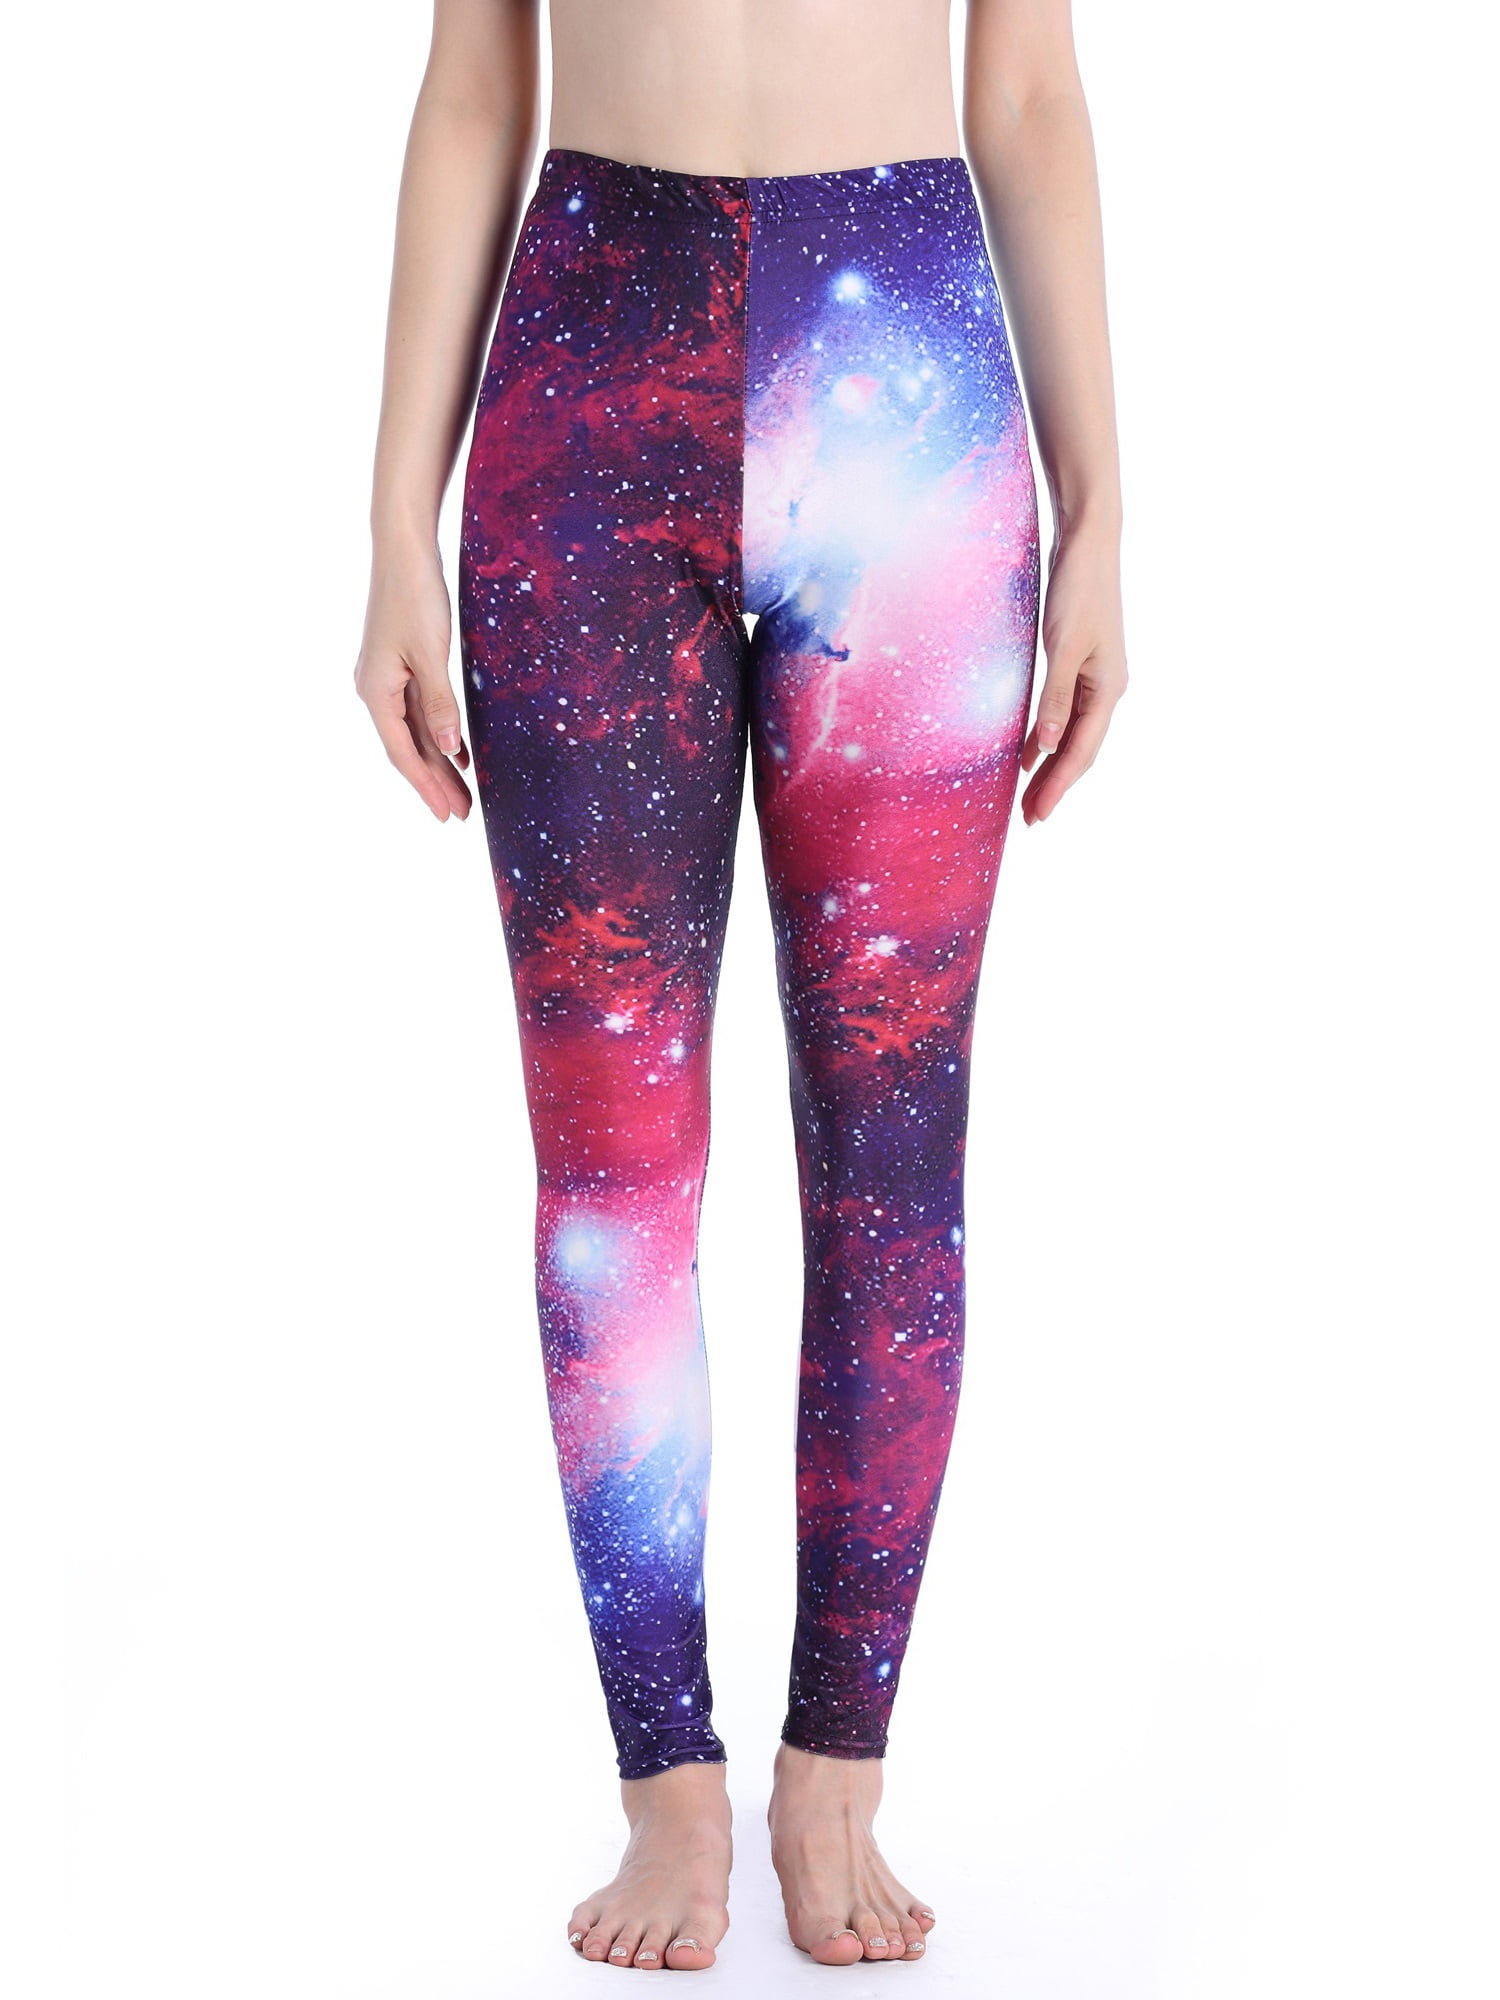 Colourful Space Leggings Galaxy Circus Yoga Pants Women High Waist  Activewear Plus Size Gym Apparel Athletic Gear Color Balls Workout Pant 